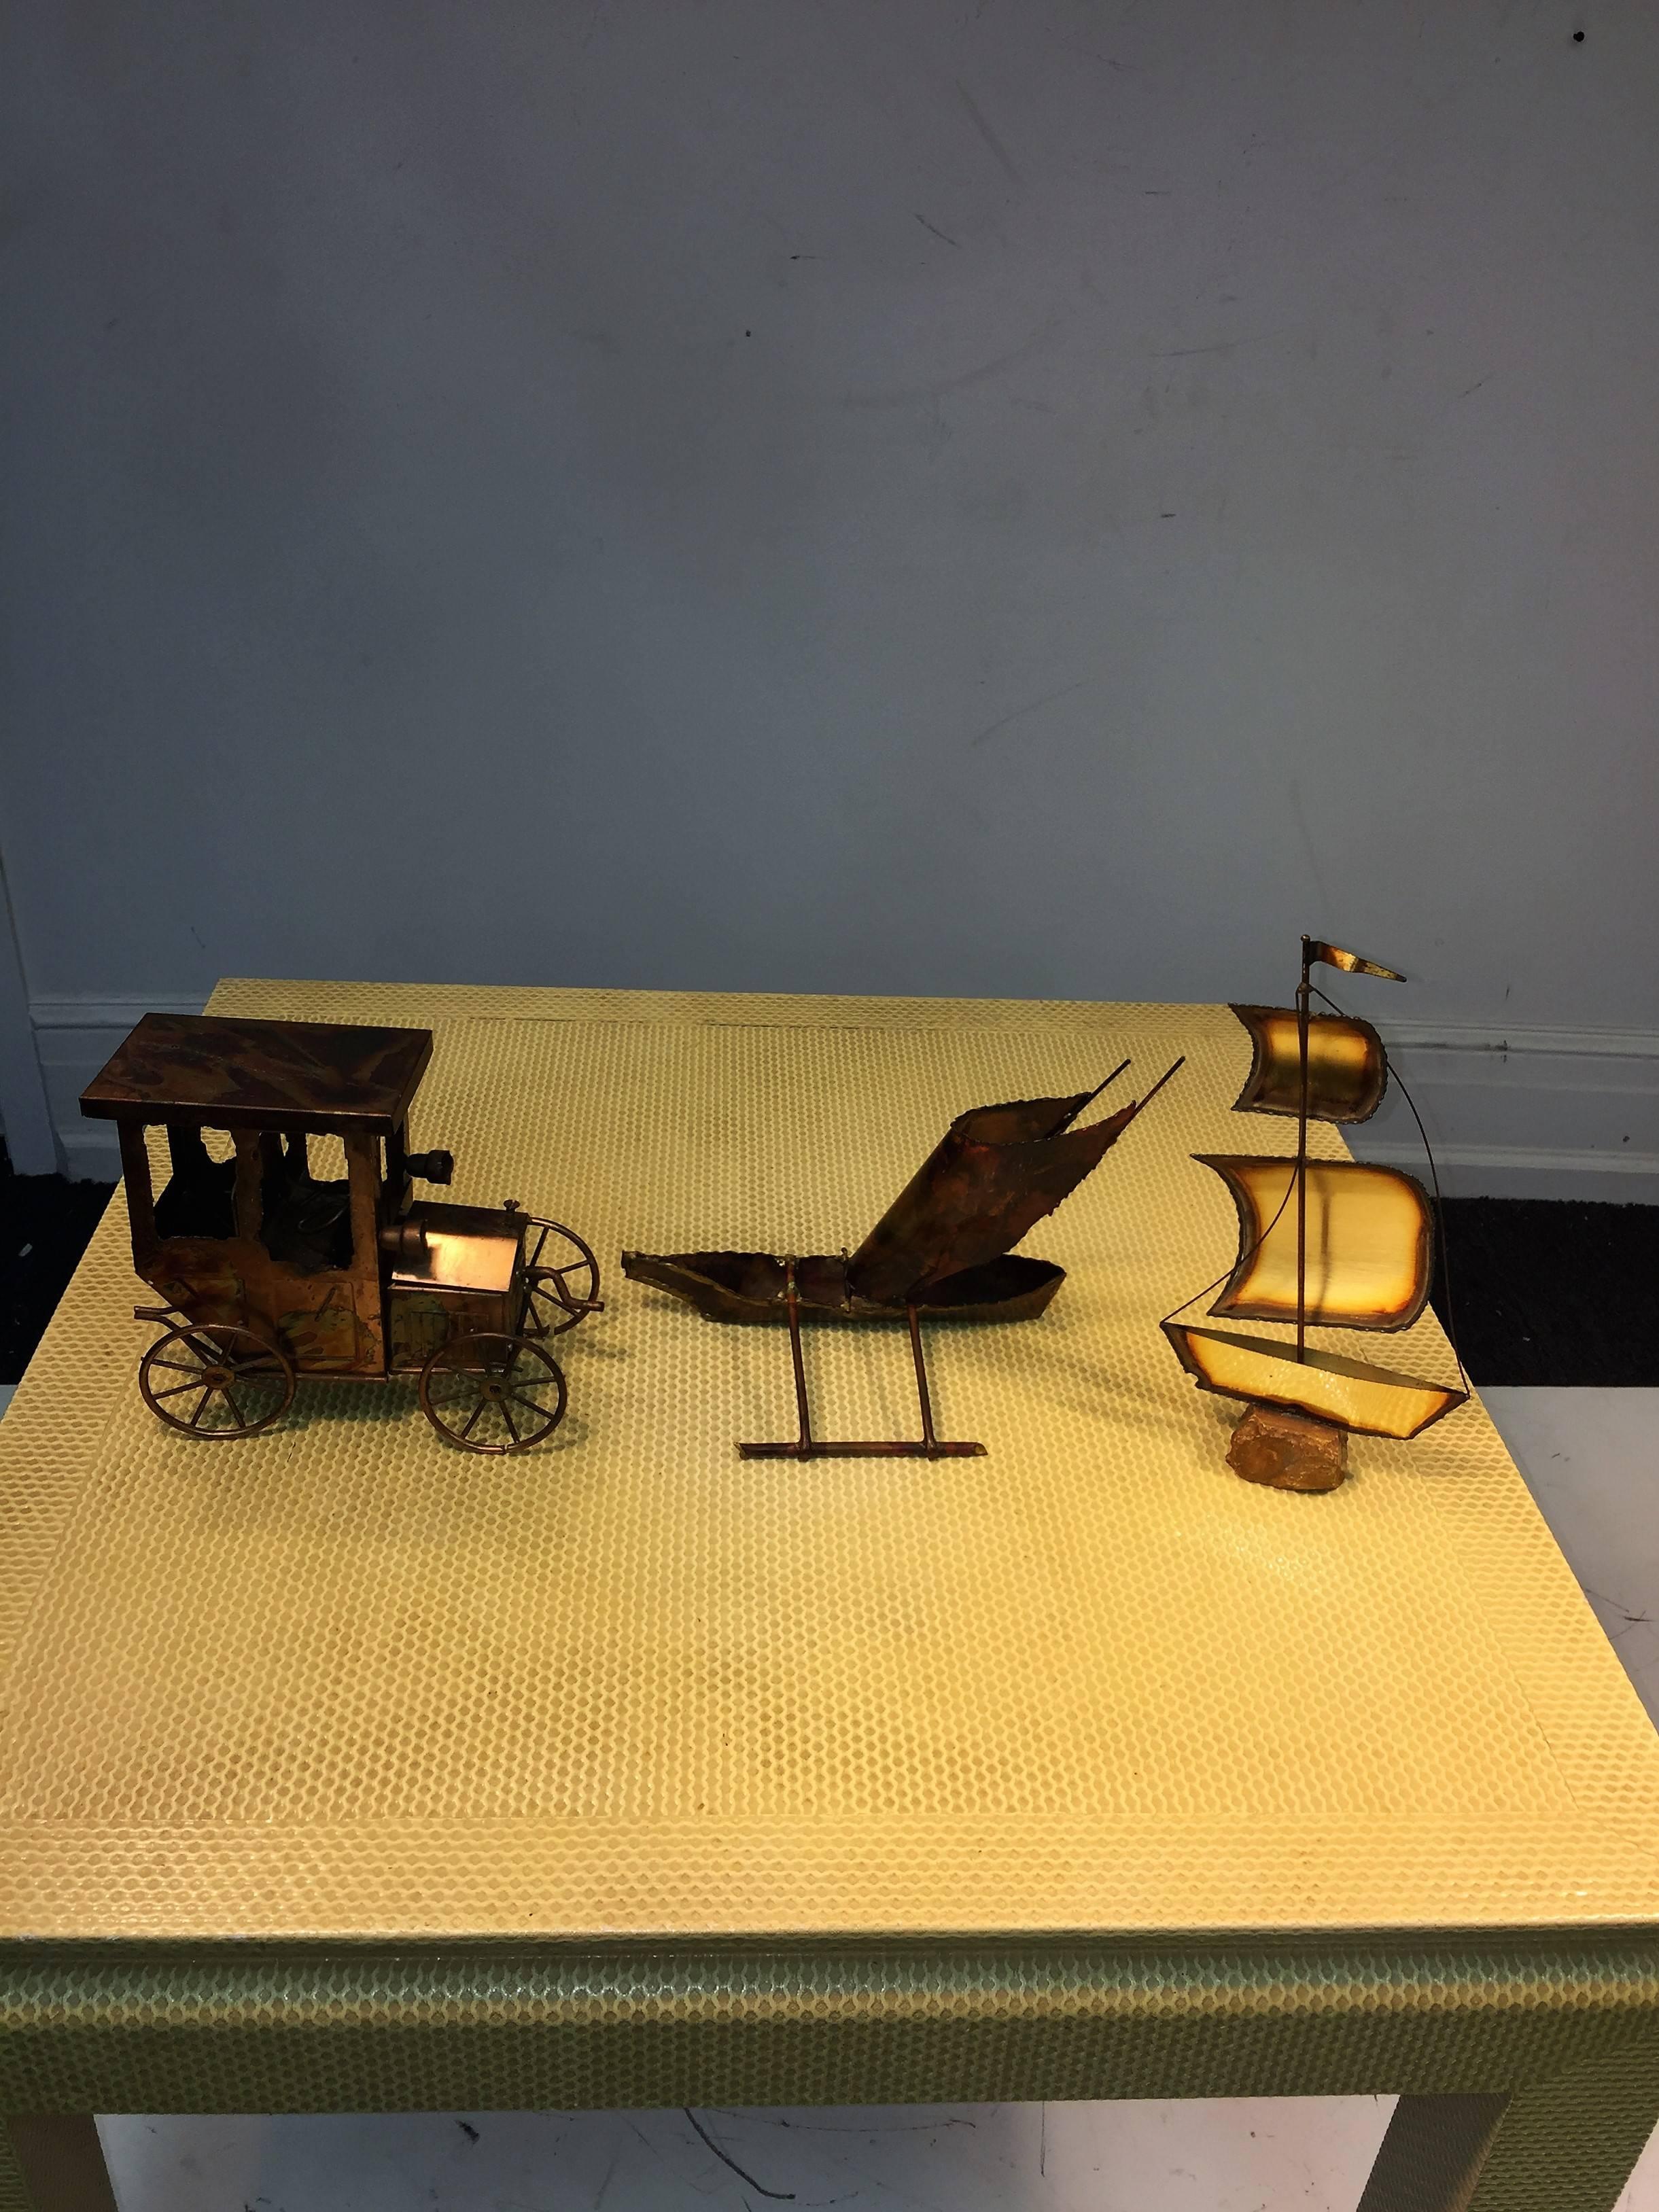 Trio of brutalist mixed metal sculptures with original tag, cool musical model “T” ford, catamaran boat and galleon with flag on onyx base.
Model “T” ford is a music box and the cars crank start is the winder and the cars hood moves up and down